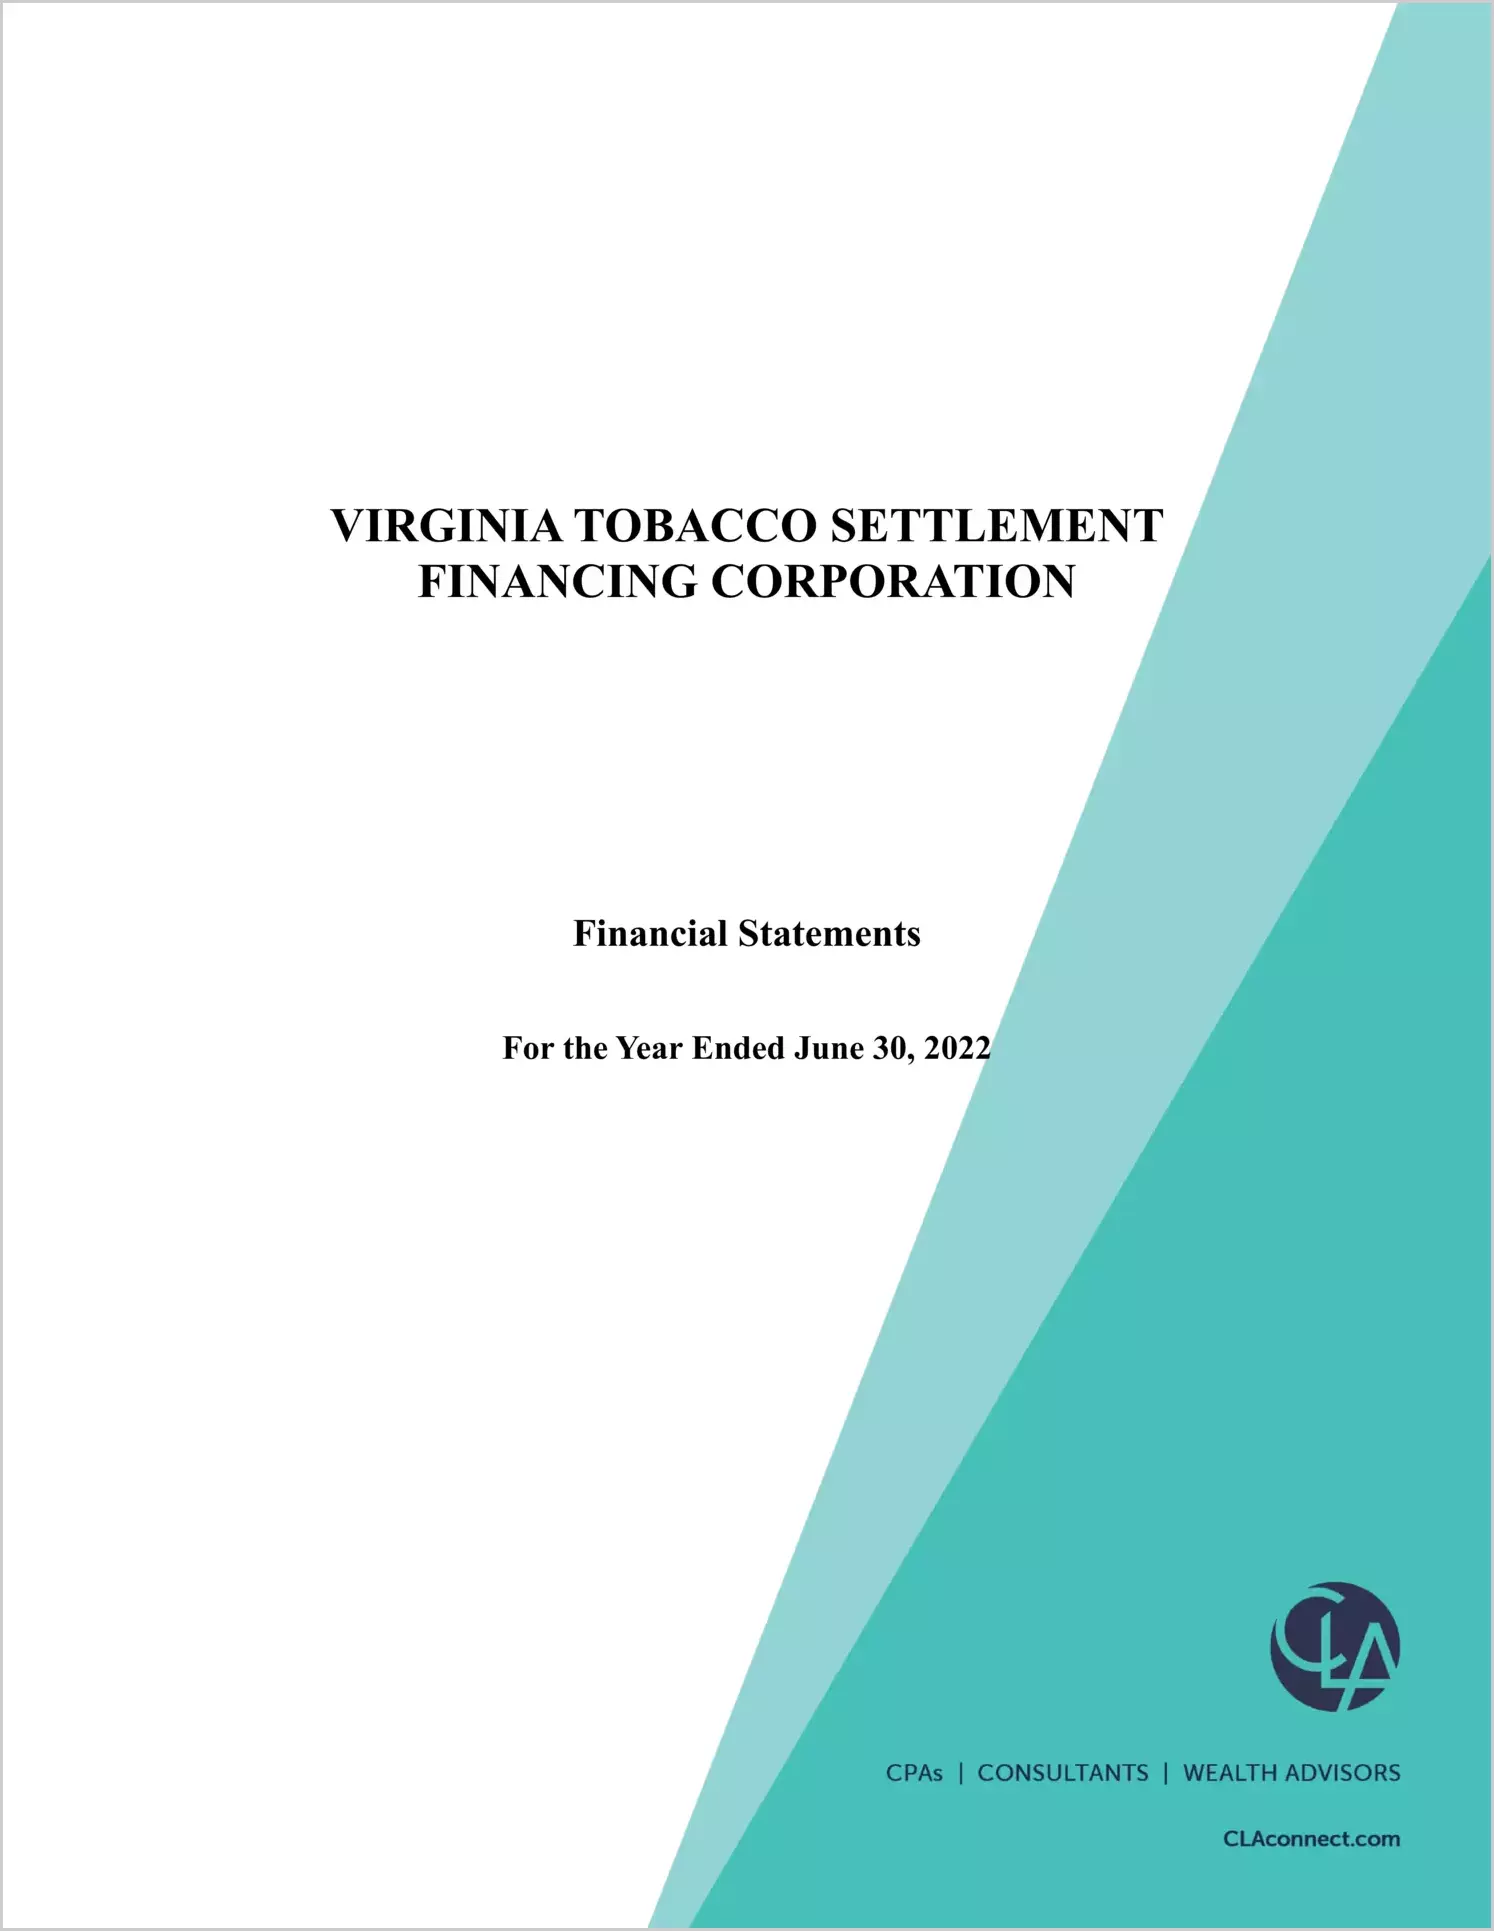 Virginia Tobacco Settlement Financing Corporation for the year ended June 30, 2022